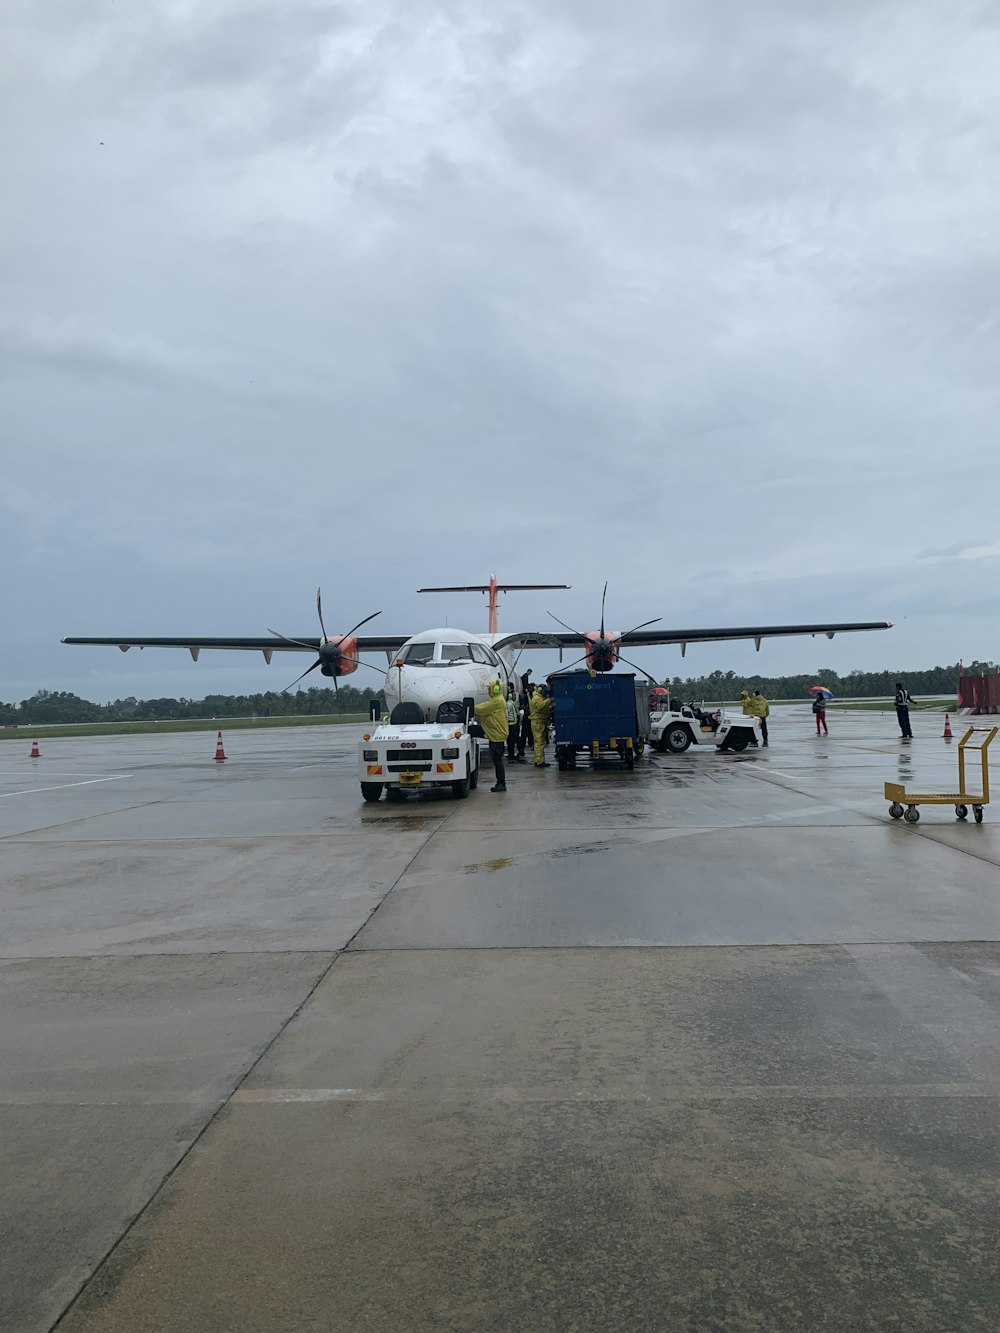 a plane is parked on the tarmac at an airport